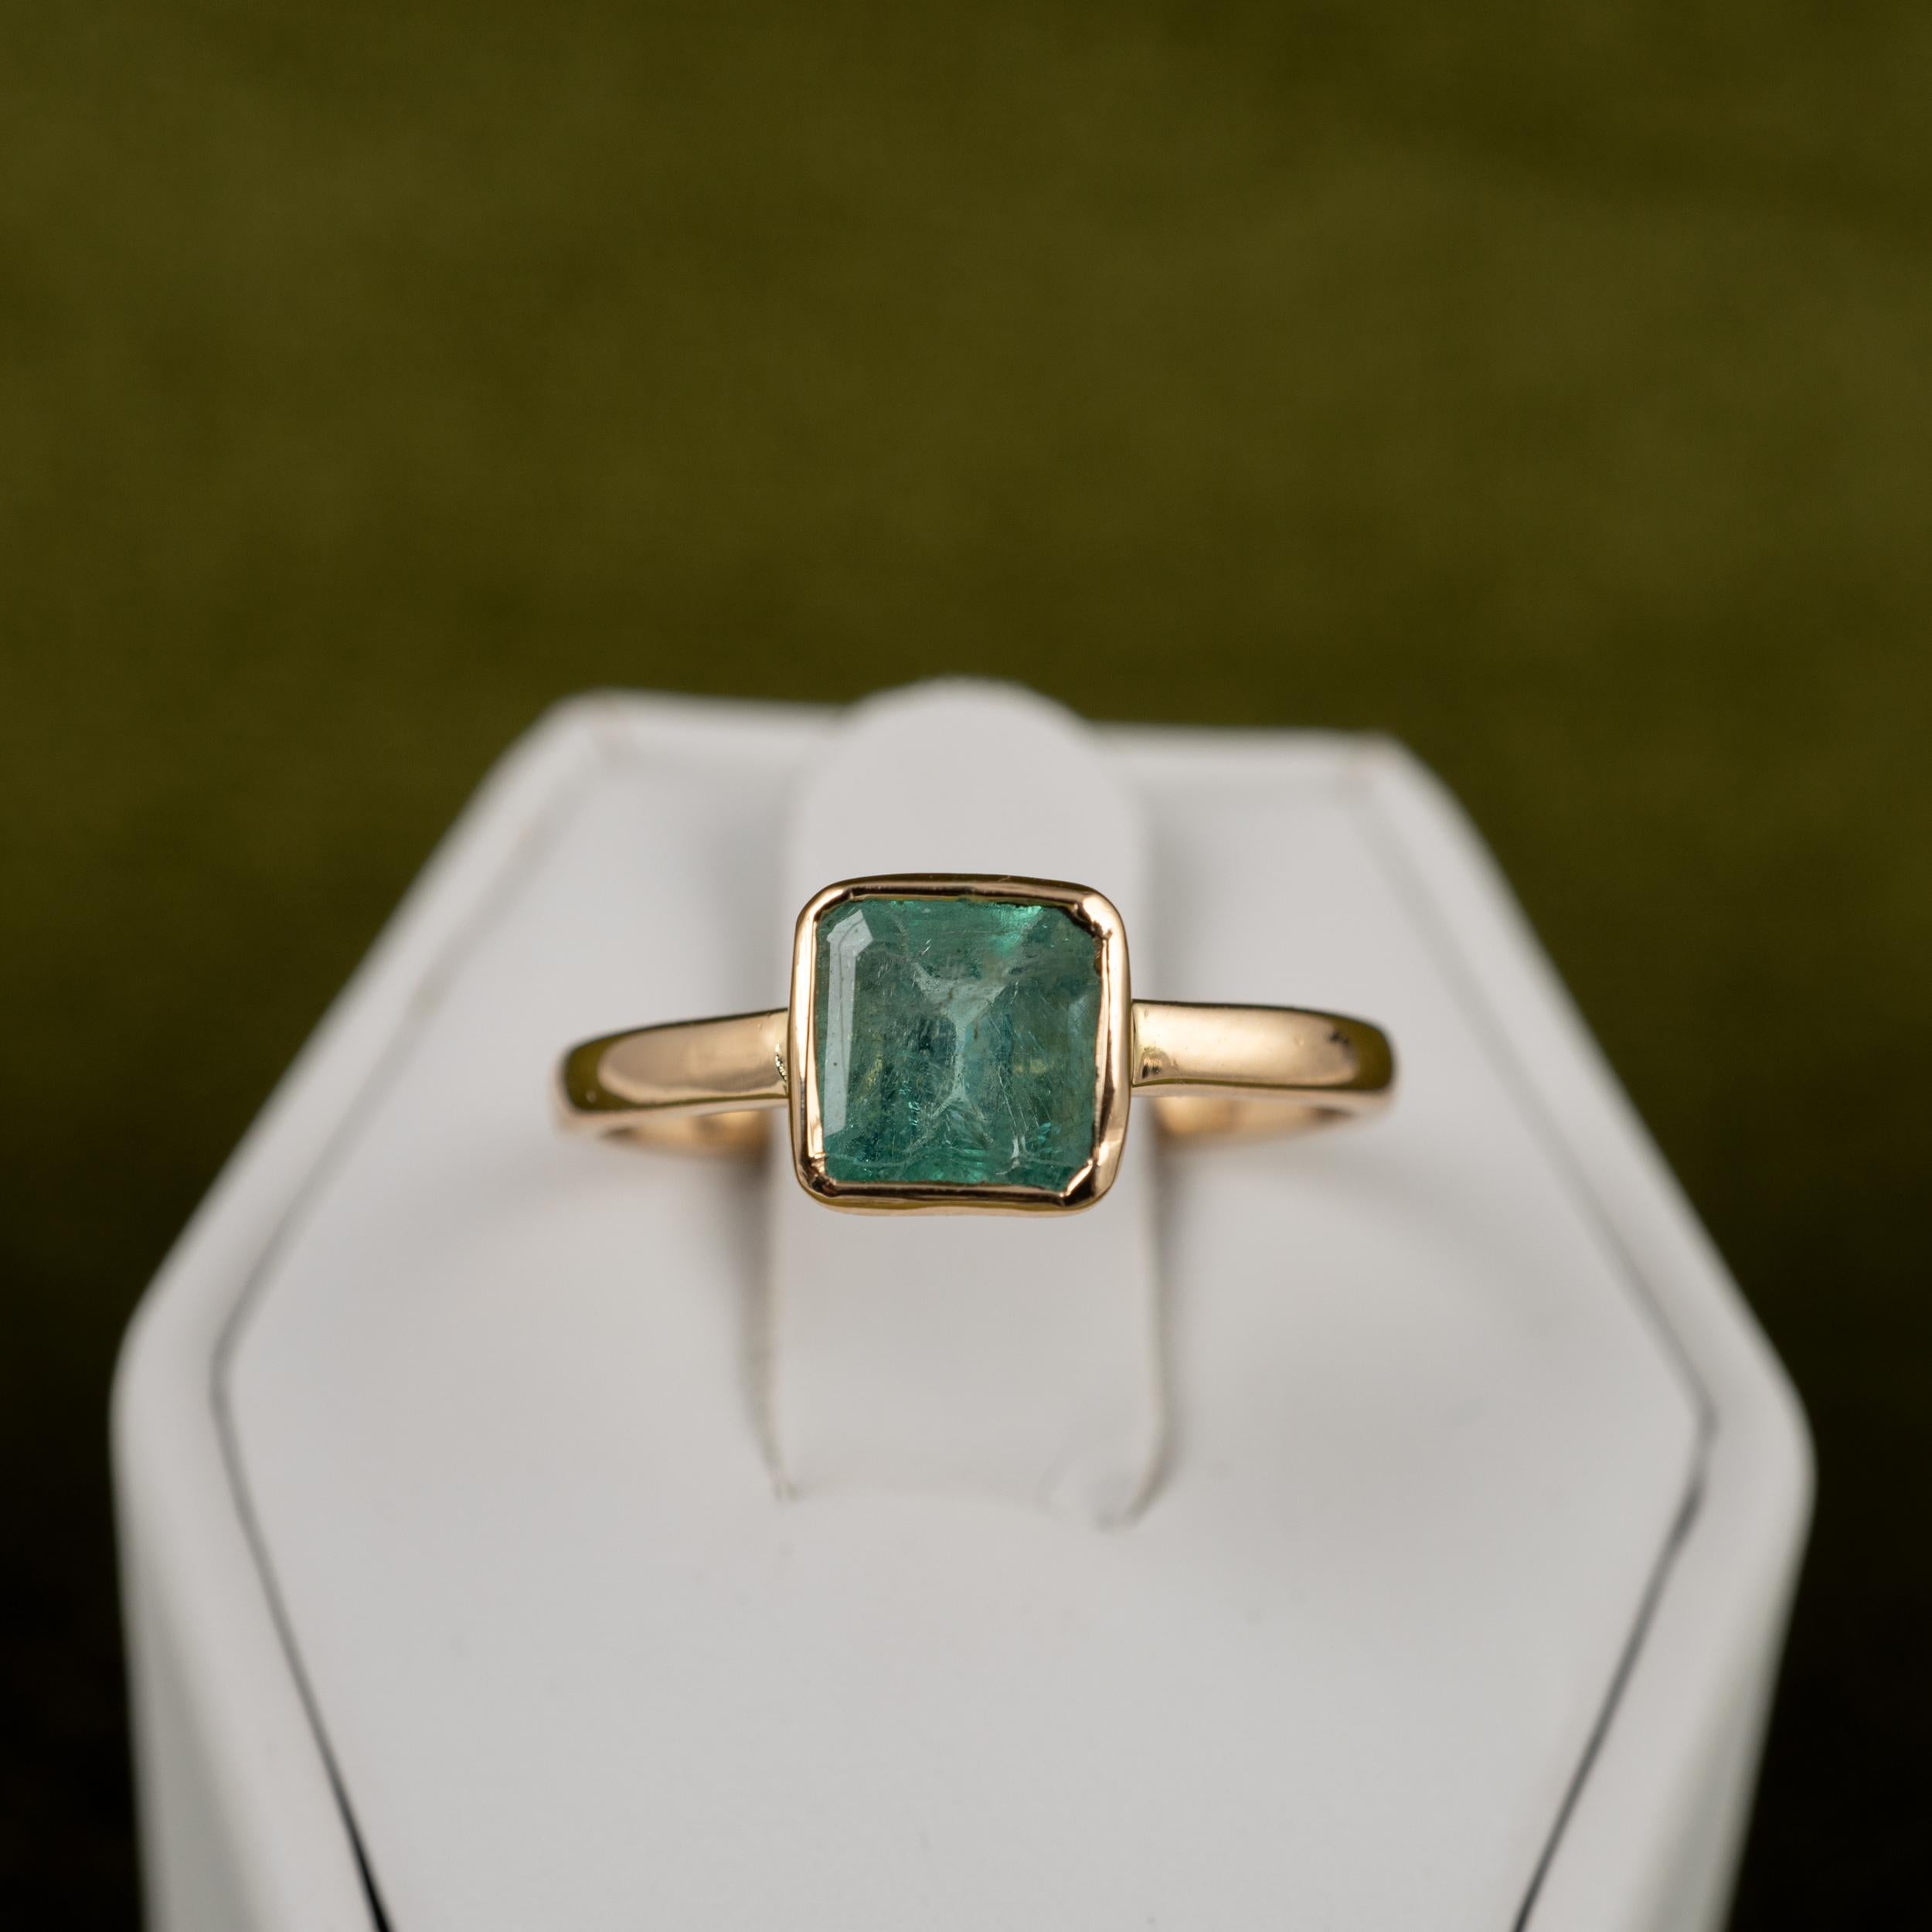 Certified 1.5 Carat Emerald Solitaire Ring 18 Karat Yellow Gold In Excellent Condition In Preston, Lancashire